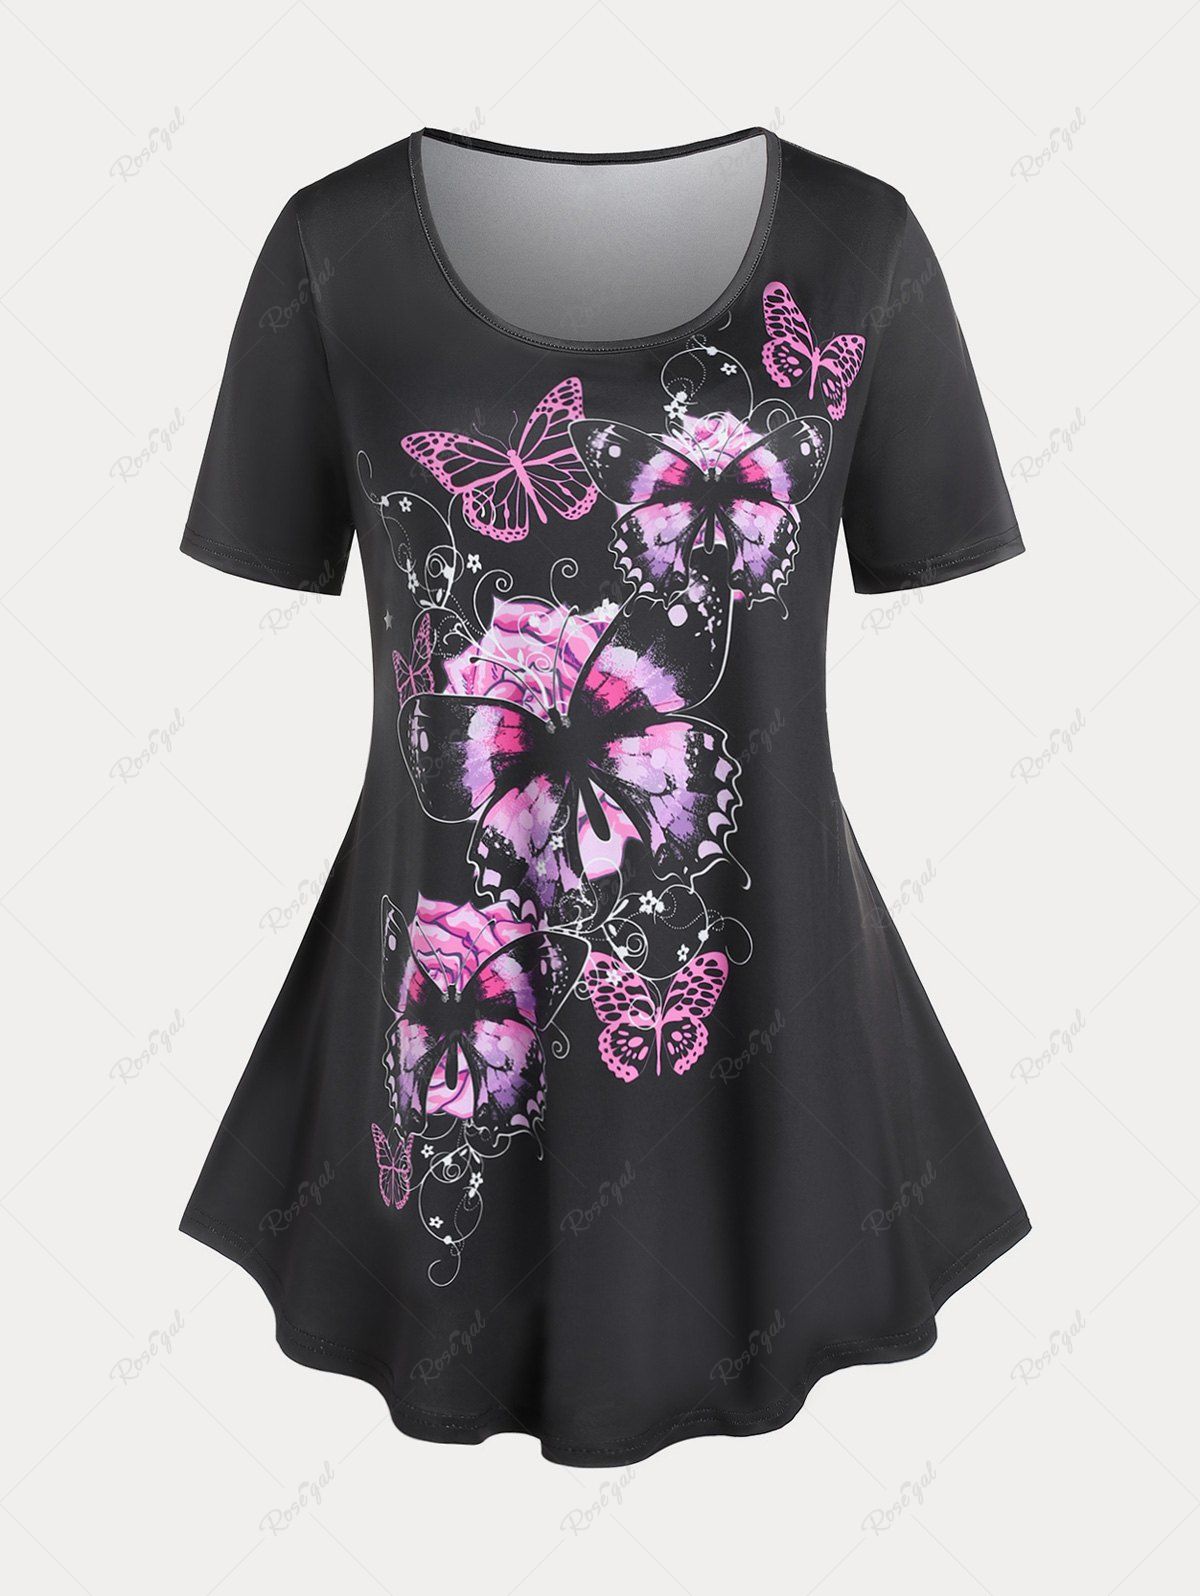 Chic Floral Butterfly Print Plus Size Tunic T-shirt  